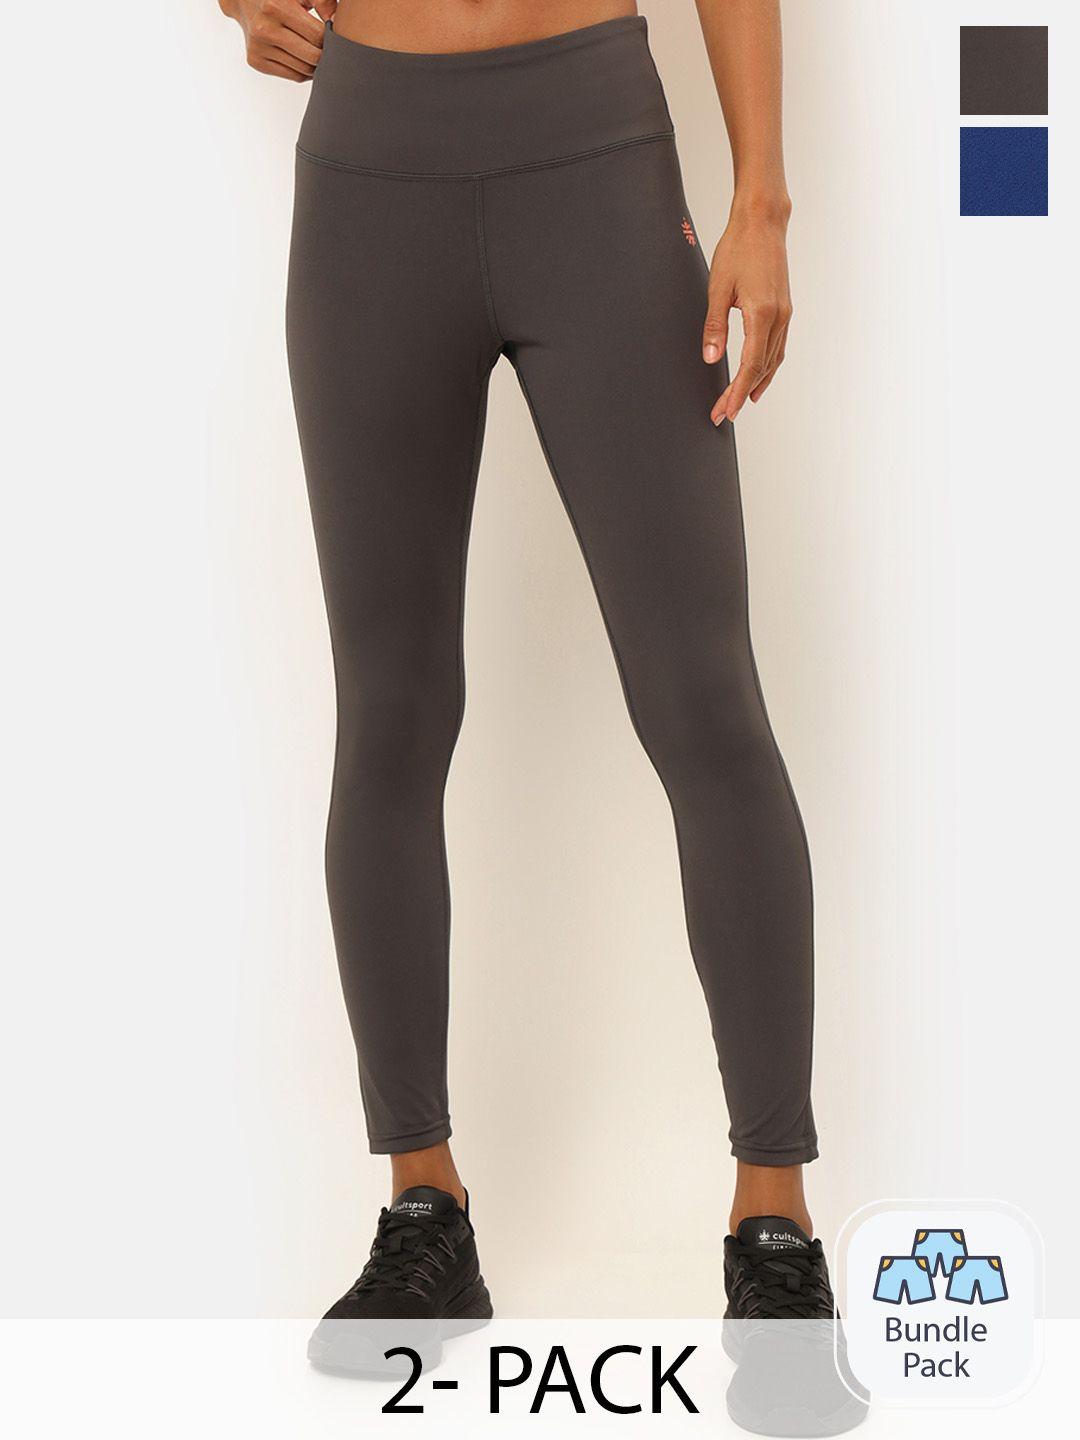 cultsport pack of 2 mid rise compression tights